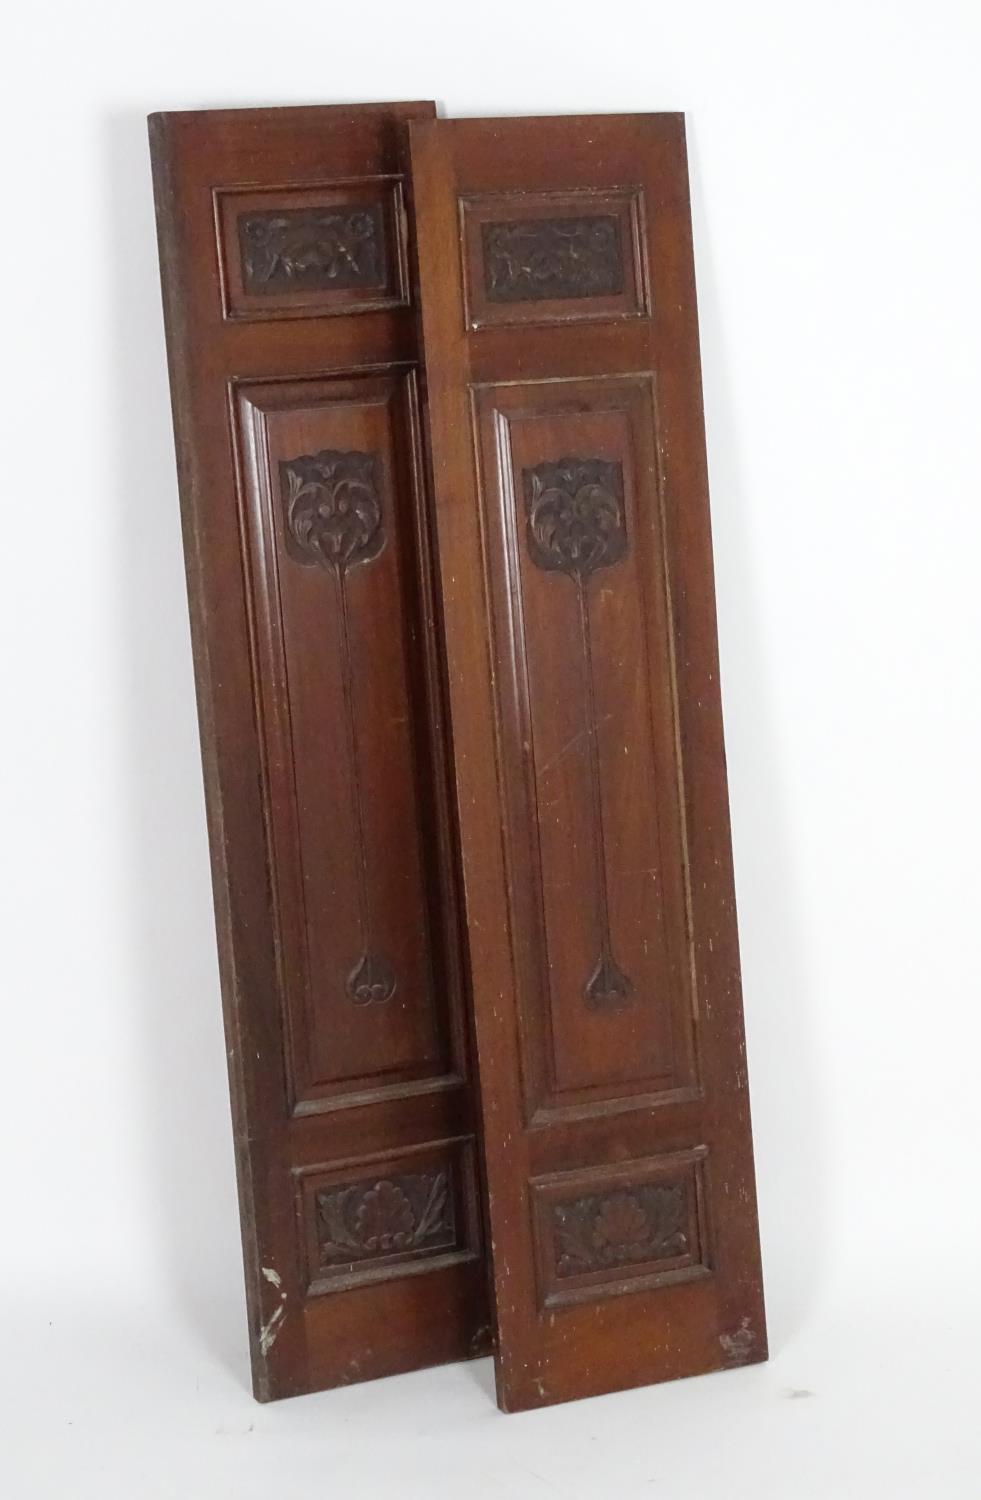 A pair of early 20thC mahogany panels with carved Art Nouveau decoration. 13" wide x 55" high.